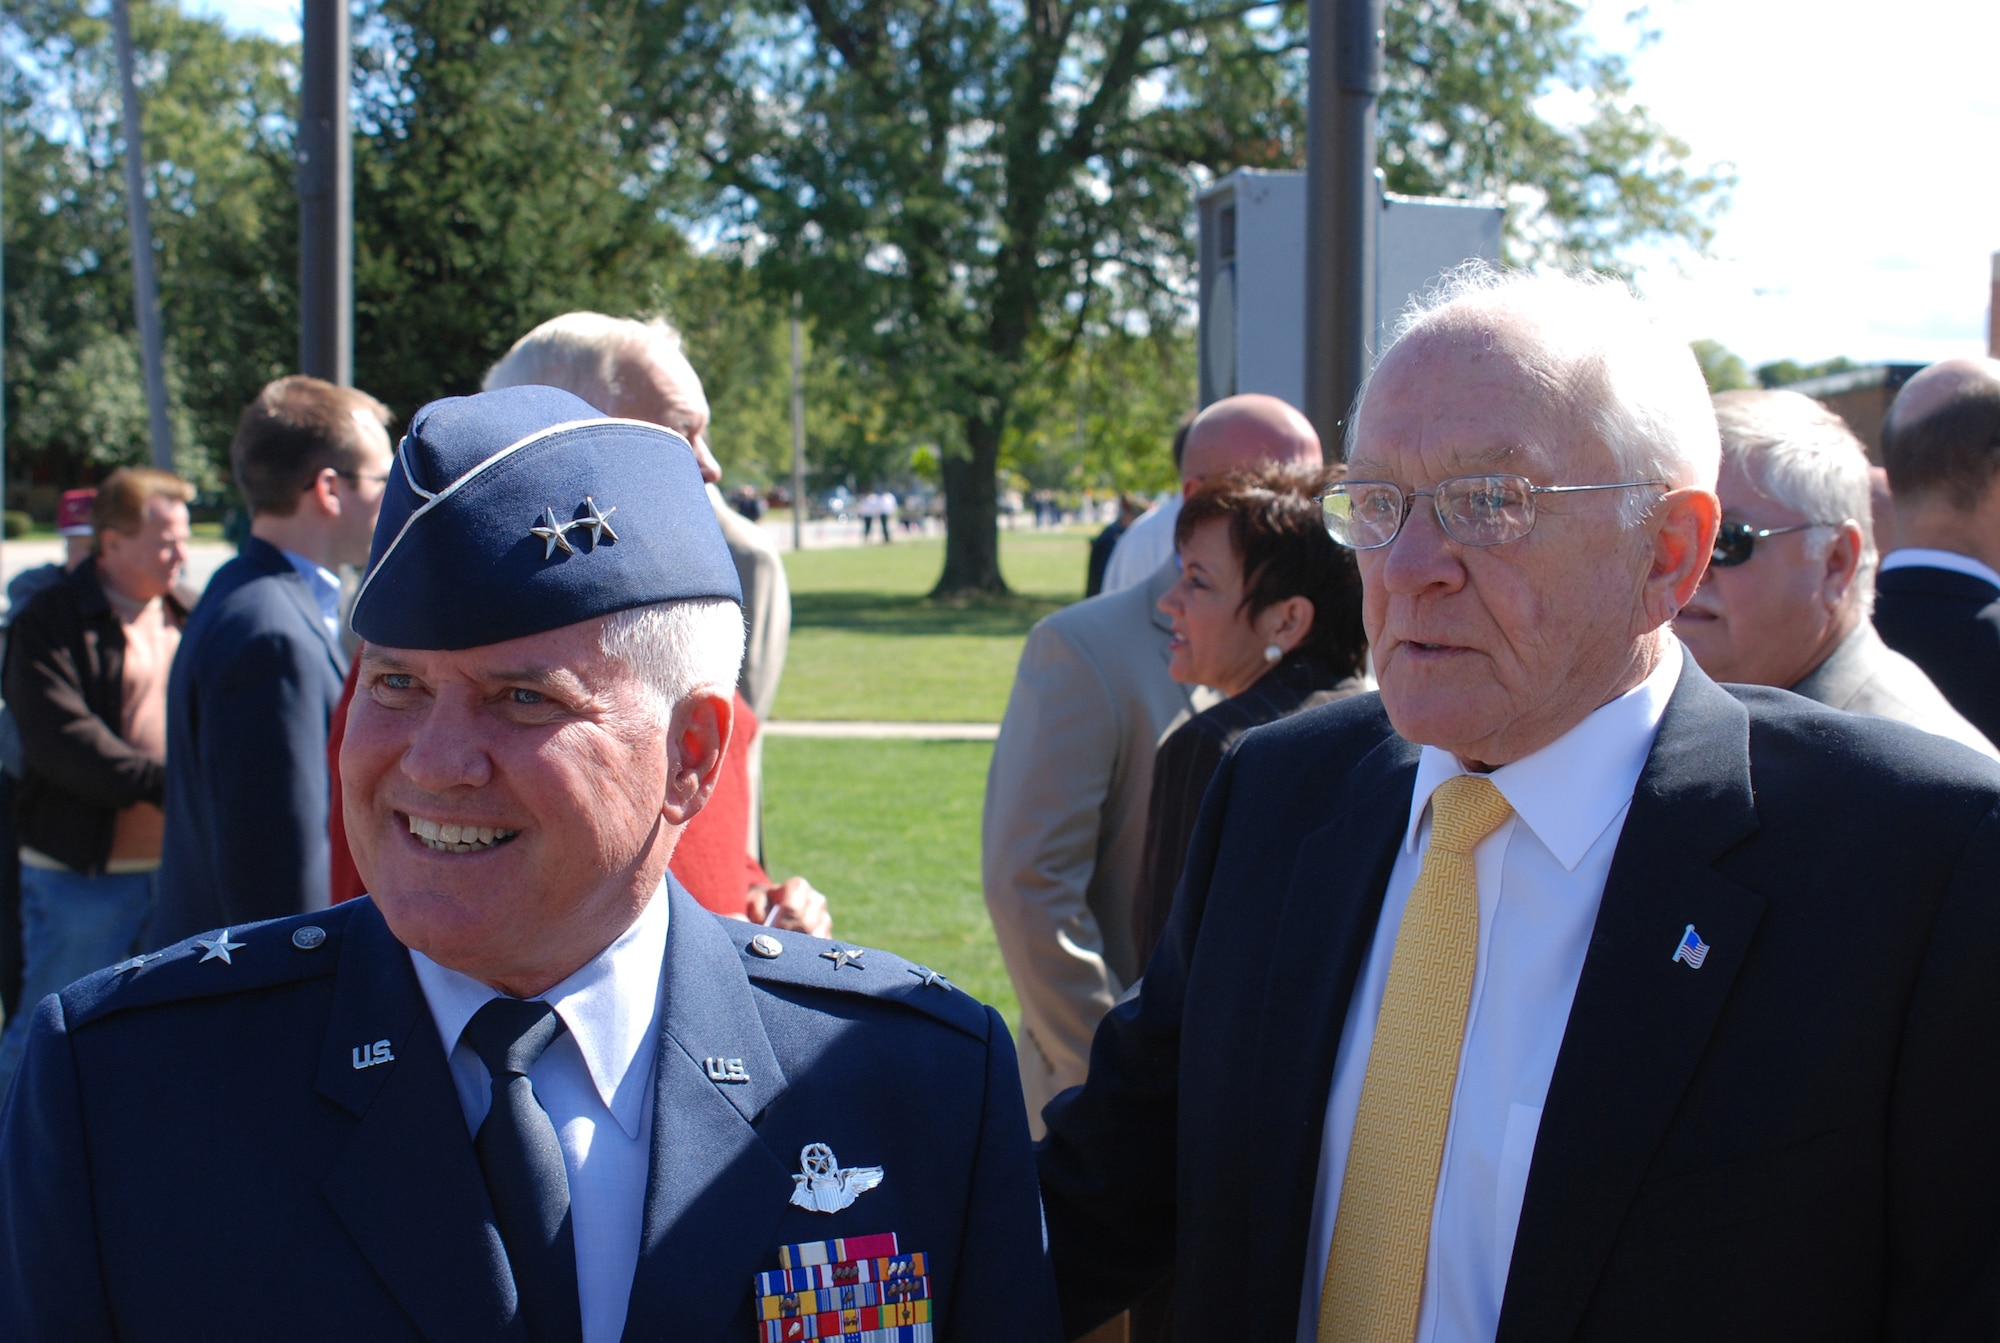 Maj. Gen. Allan R. Poulin, left, vice commander of Air Force Reserve Command, and retired Col. James H. Kasler chat with other people after the Kasler-Momence Veterans Park dedication in Momence, Ill., Sept. 15, 2007. The general's parents and Colonel Kasler became friends when the colonel was in the Air Force. (U.S. Air Force photo/Maj. Karl D. Lewis)